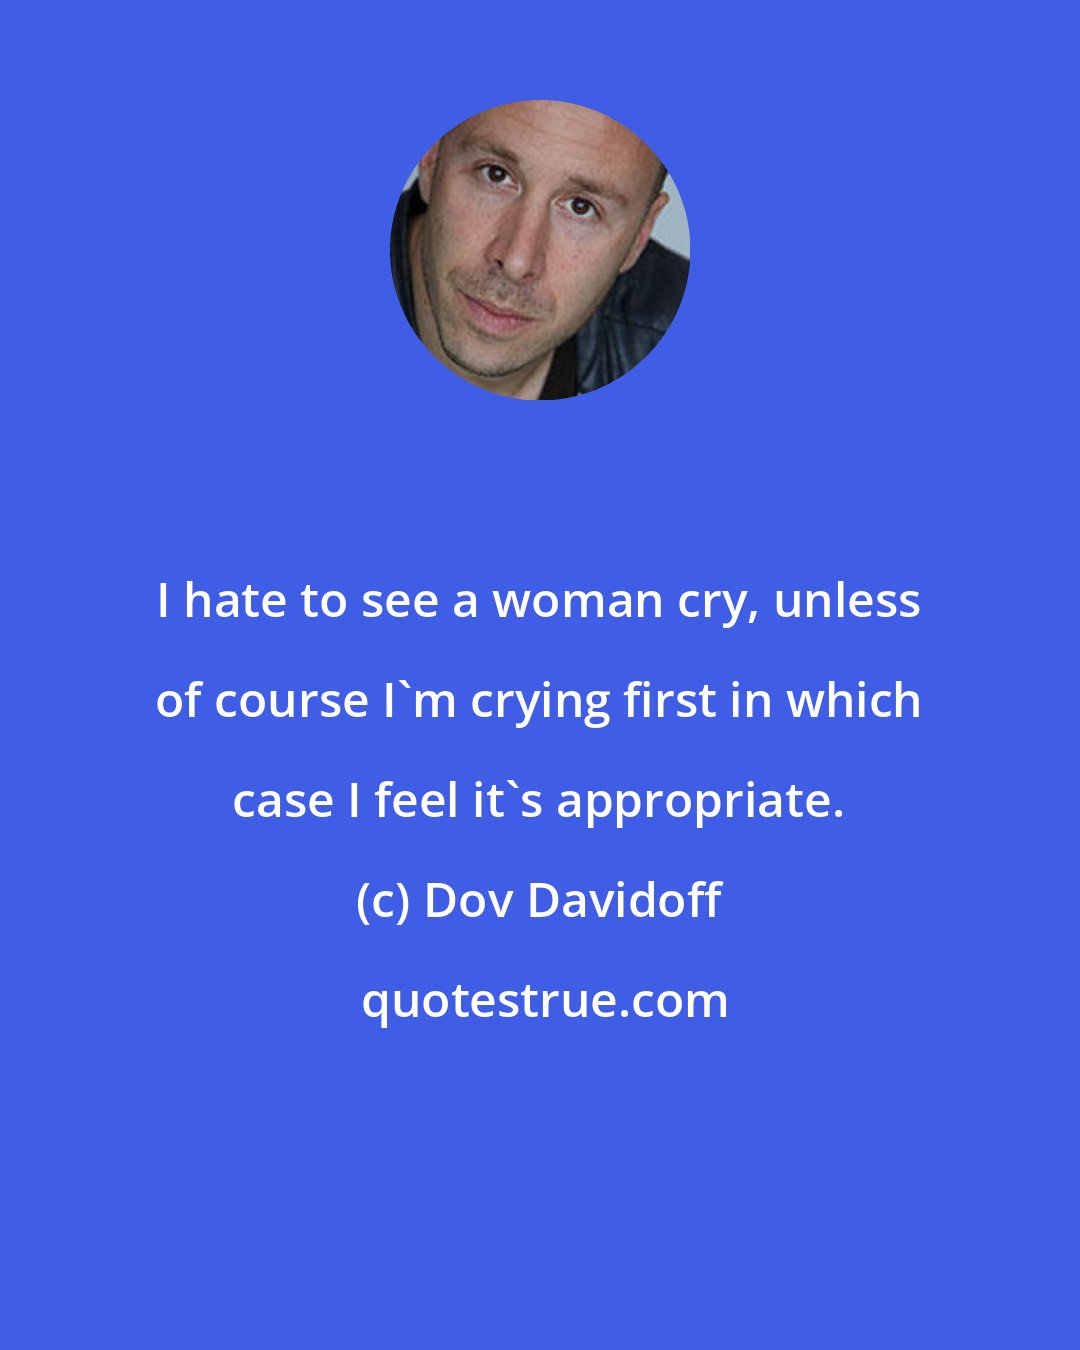 Dov Davidoff: I hate to see a woman cry, unless of course I'm crying first in which case I feel it's appropriate.